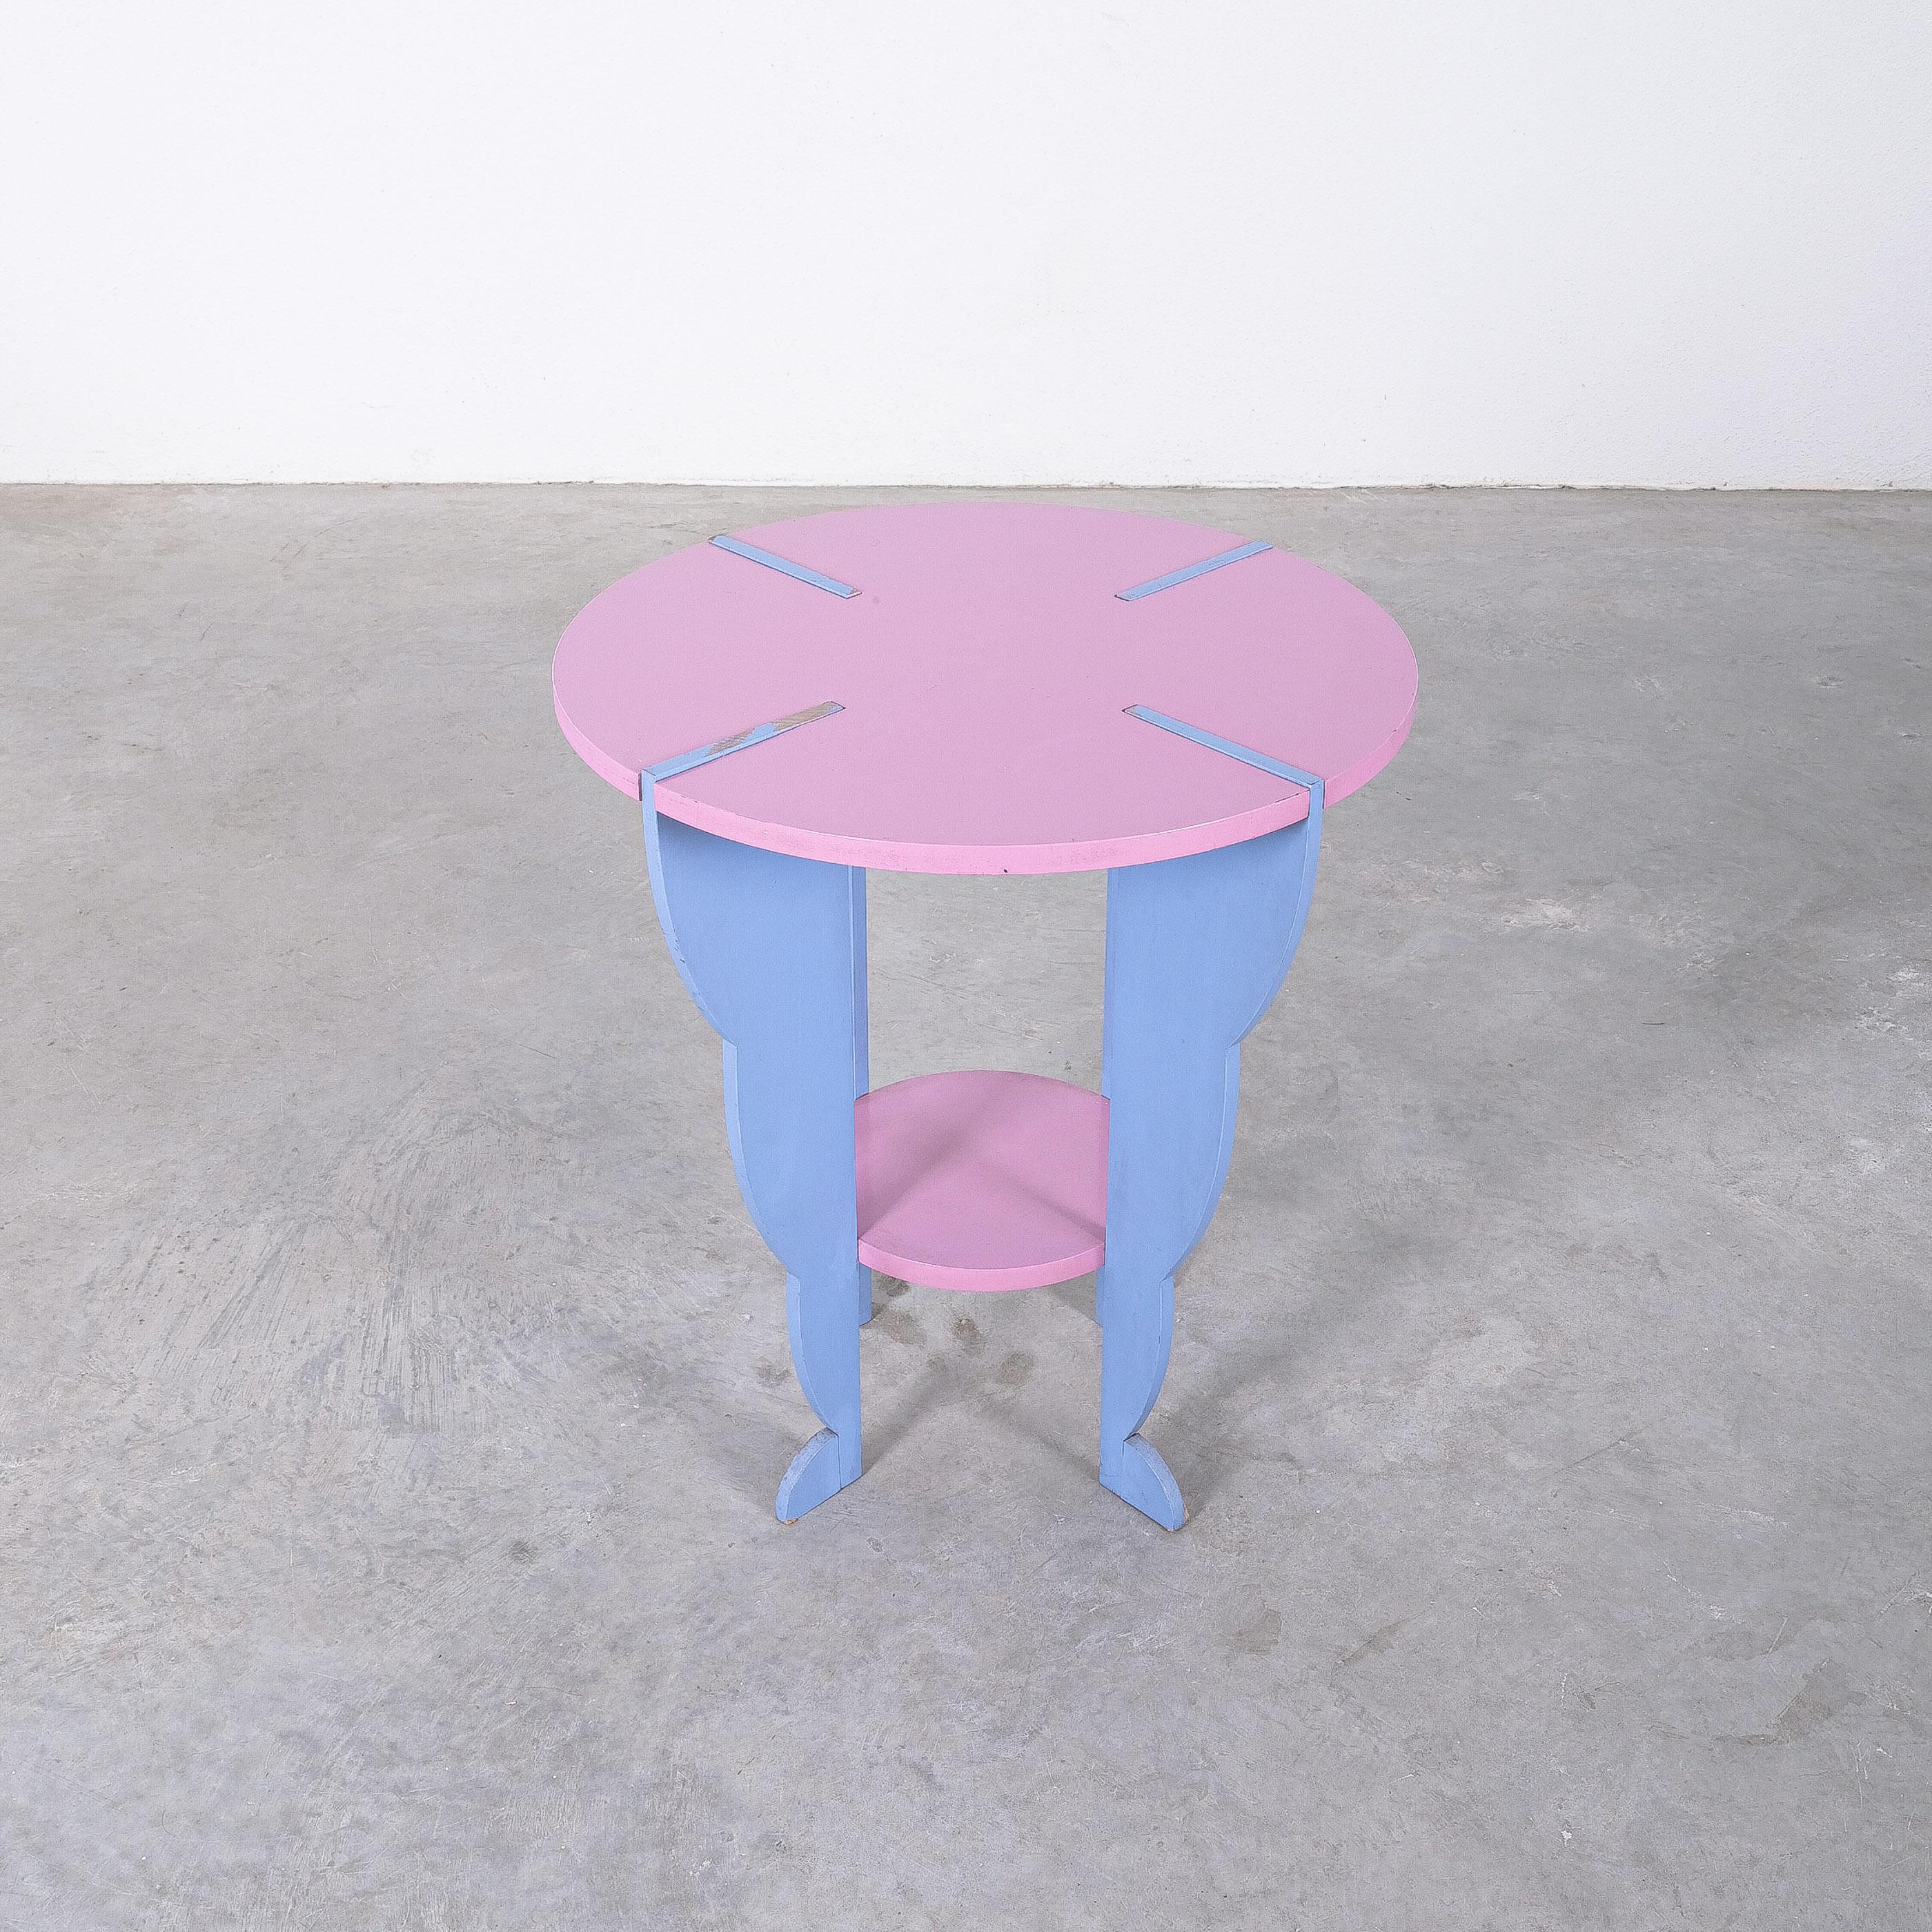 Rare table from the Flessuosa series by Ugo La Pietra for Busnelli, Italy, 1985

Museal table by Ugo La Pietra, one of the former founding members of famous Italian avant-garde group Archizoom (1960-1970) Lacquered wooden table in good condition. We